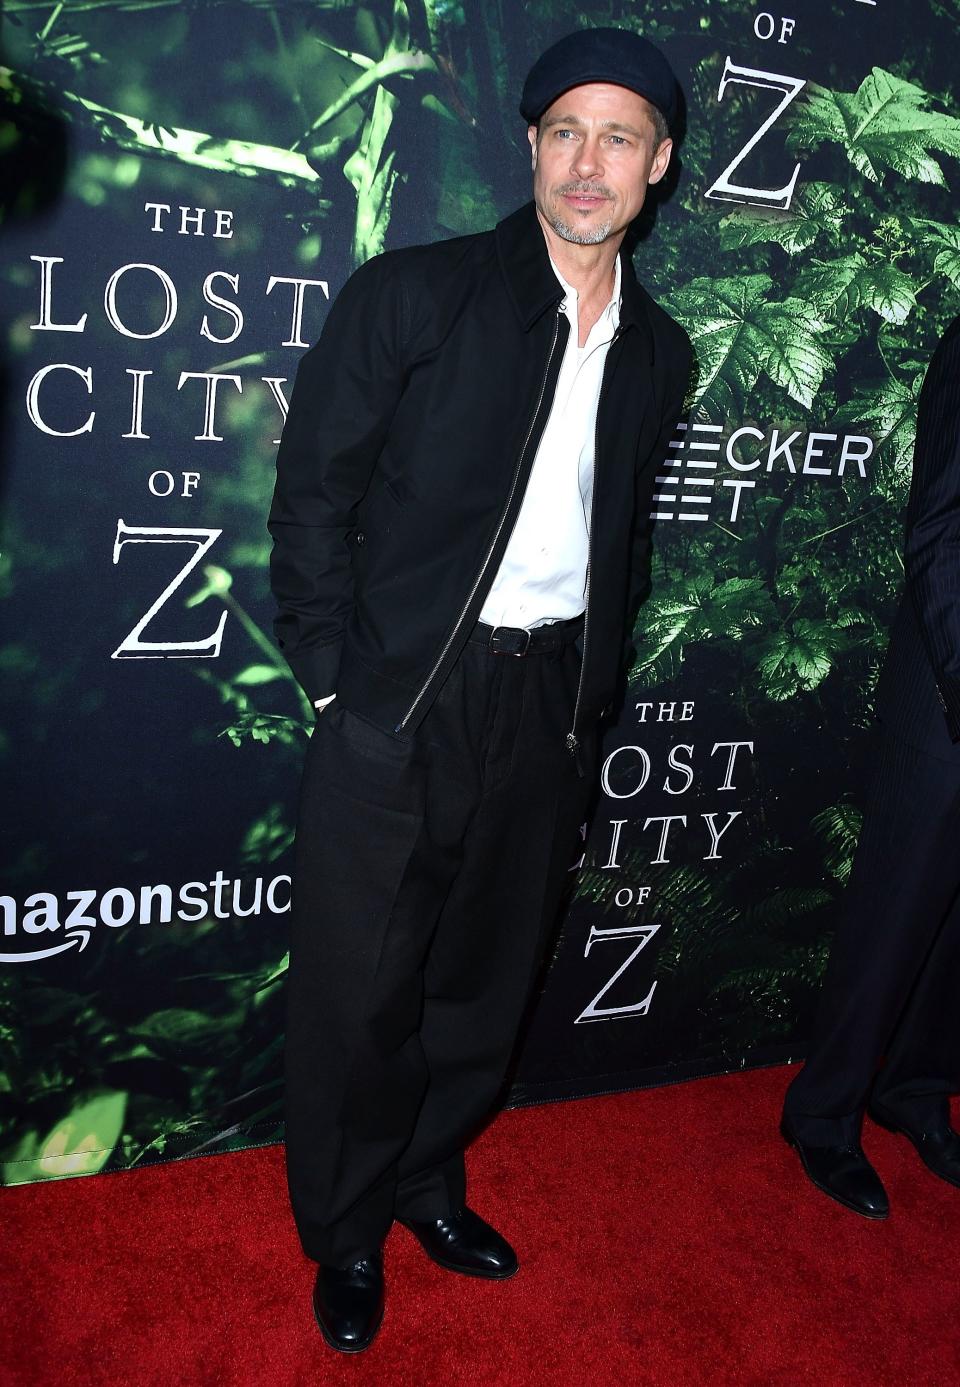 Last night Brad Pitt wore an outfit that looks a lot like one he wore in 1995, and it still looks good.